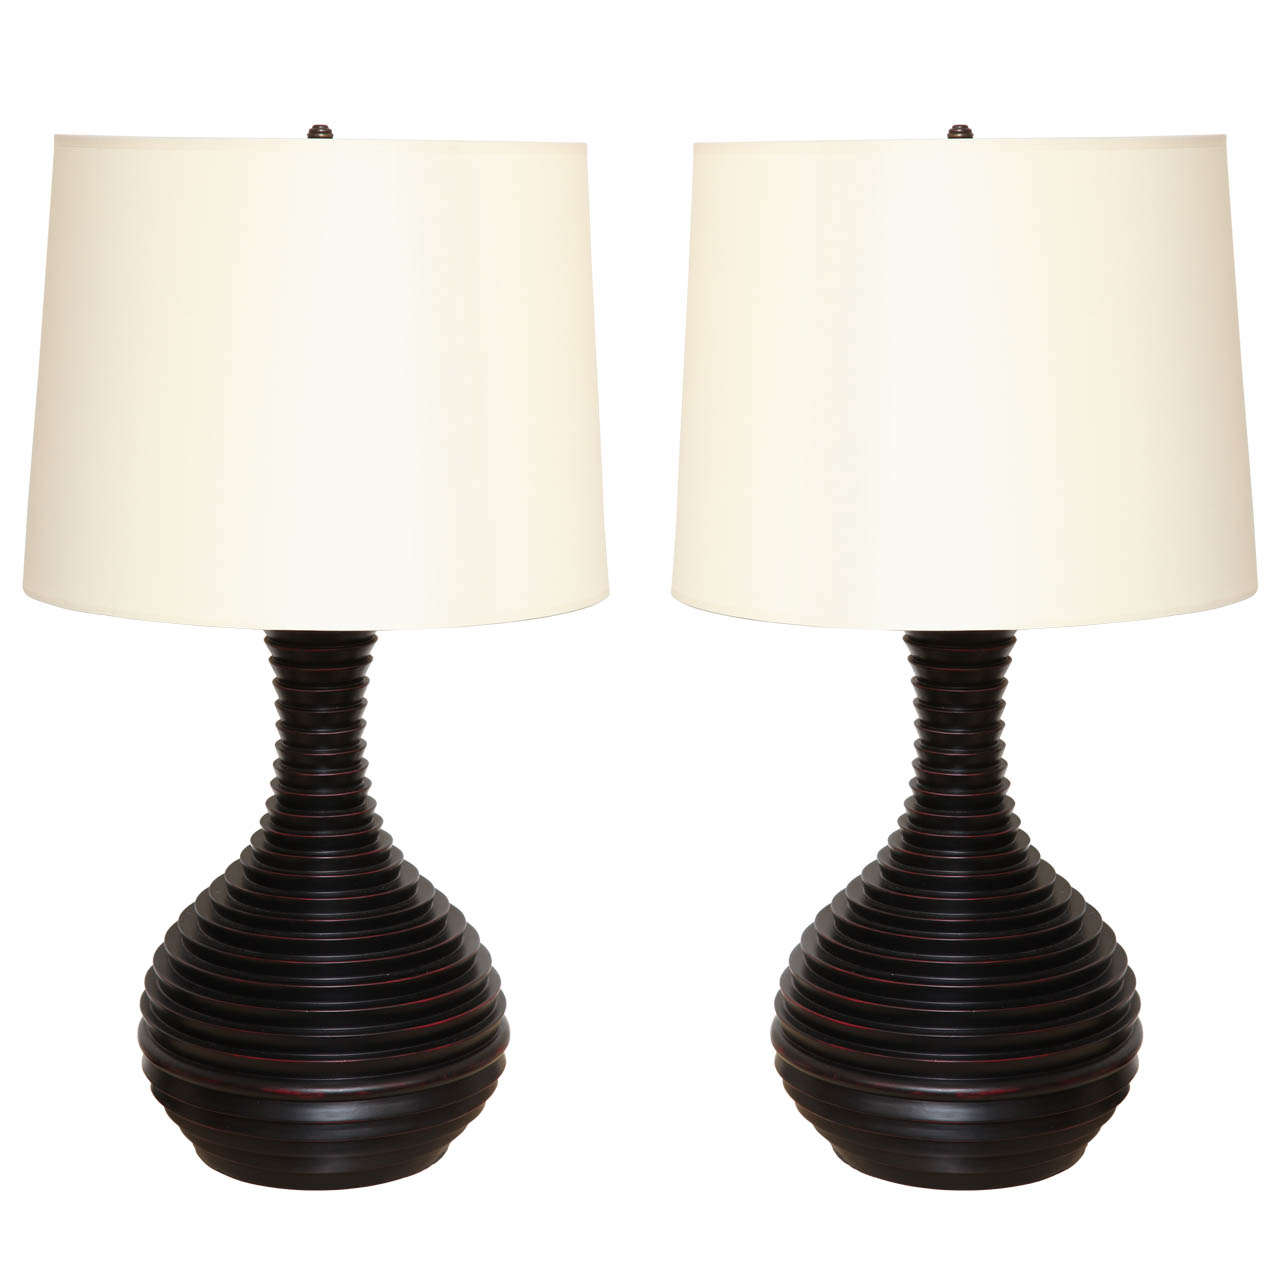 Pair Of Black Turned Wood Baluster Form Lamps, C. 1960 For Sale